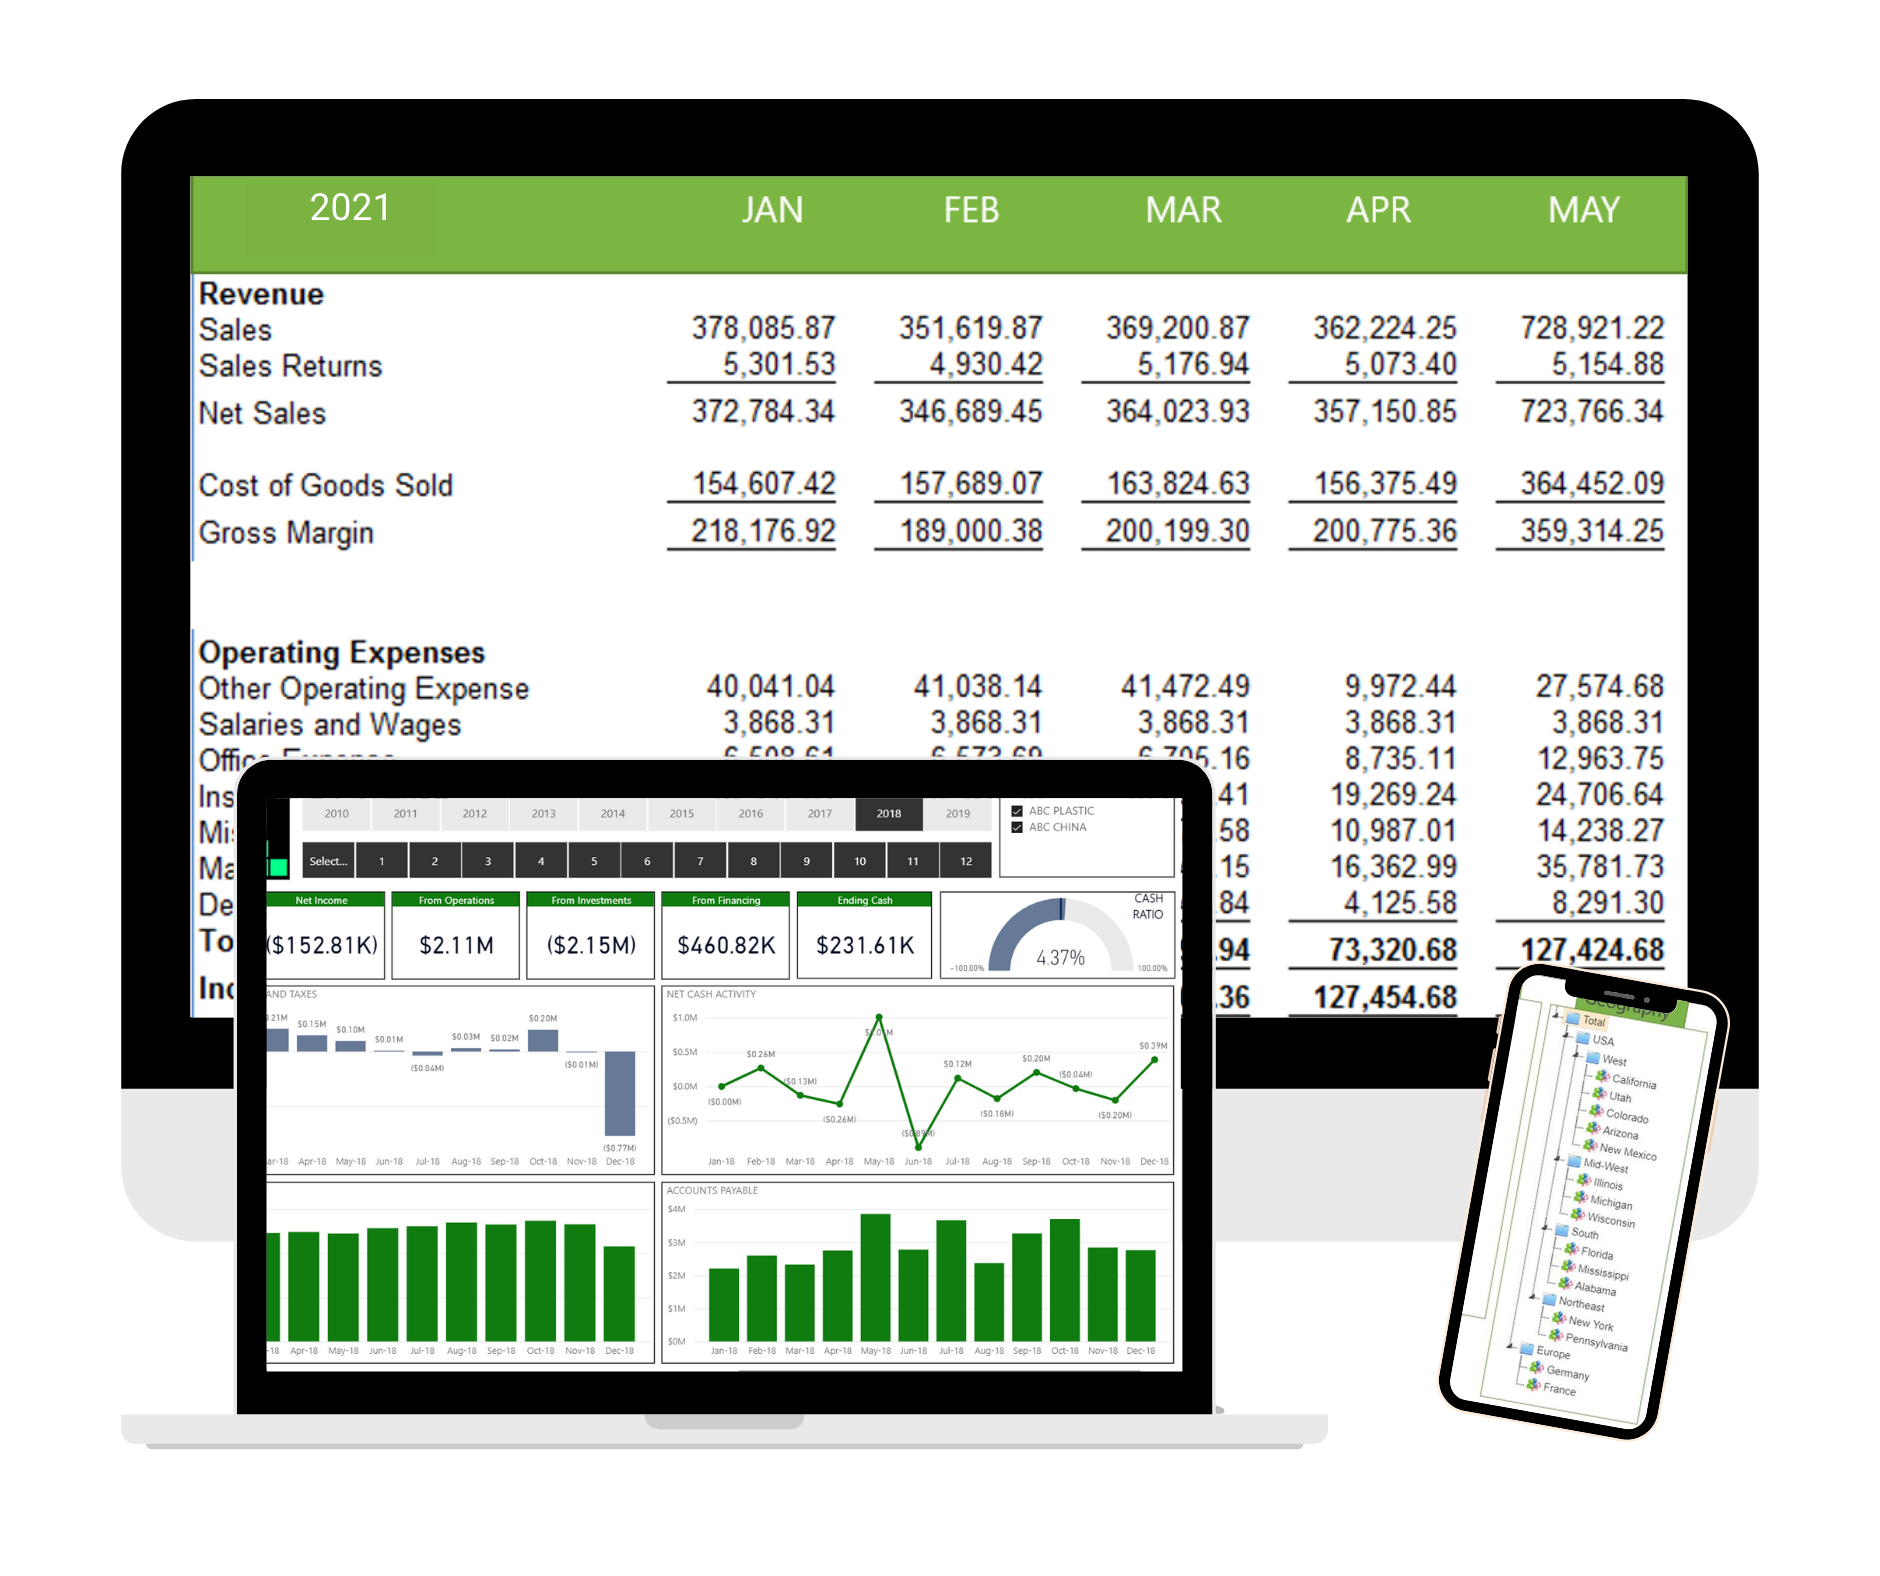 FYIsoft - Integrated platform for reporting, budgeting and analytics. 24/7 access to financial data from any device.